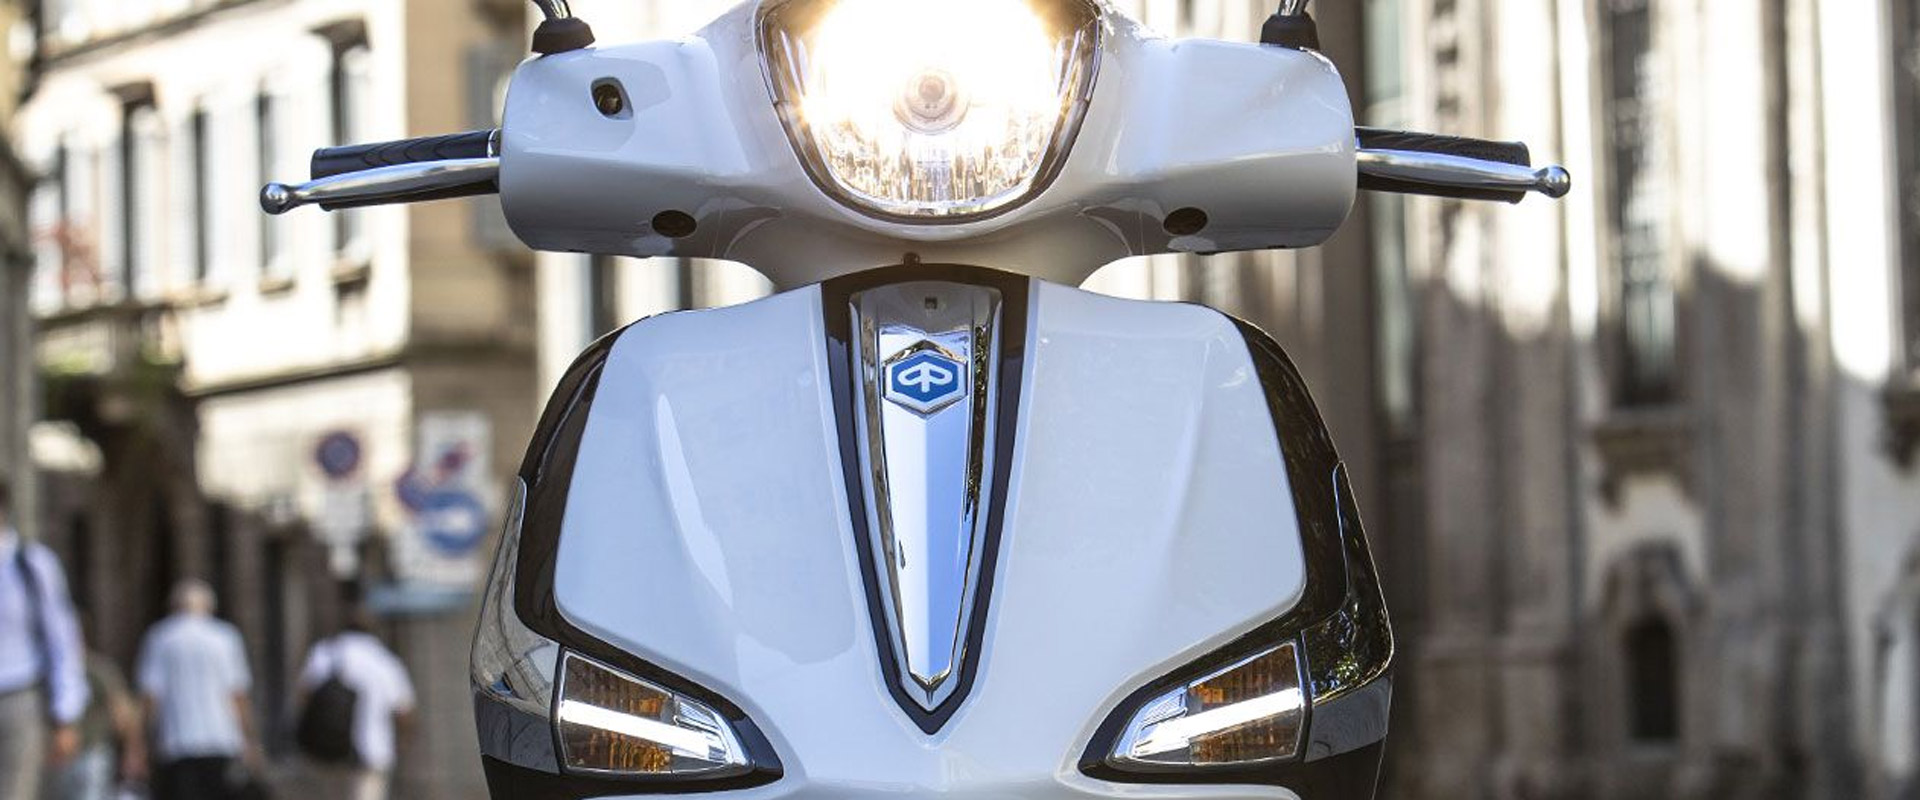 PIAGGIO LIBERTY 125 YOURS WITH 300€ DISCOUNT